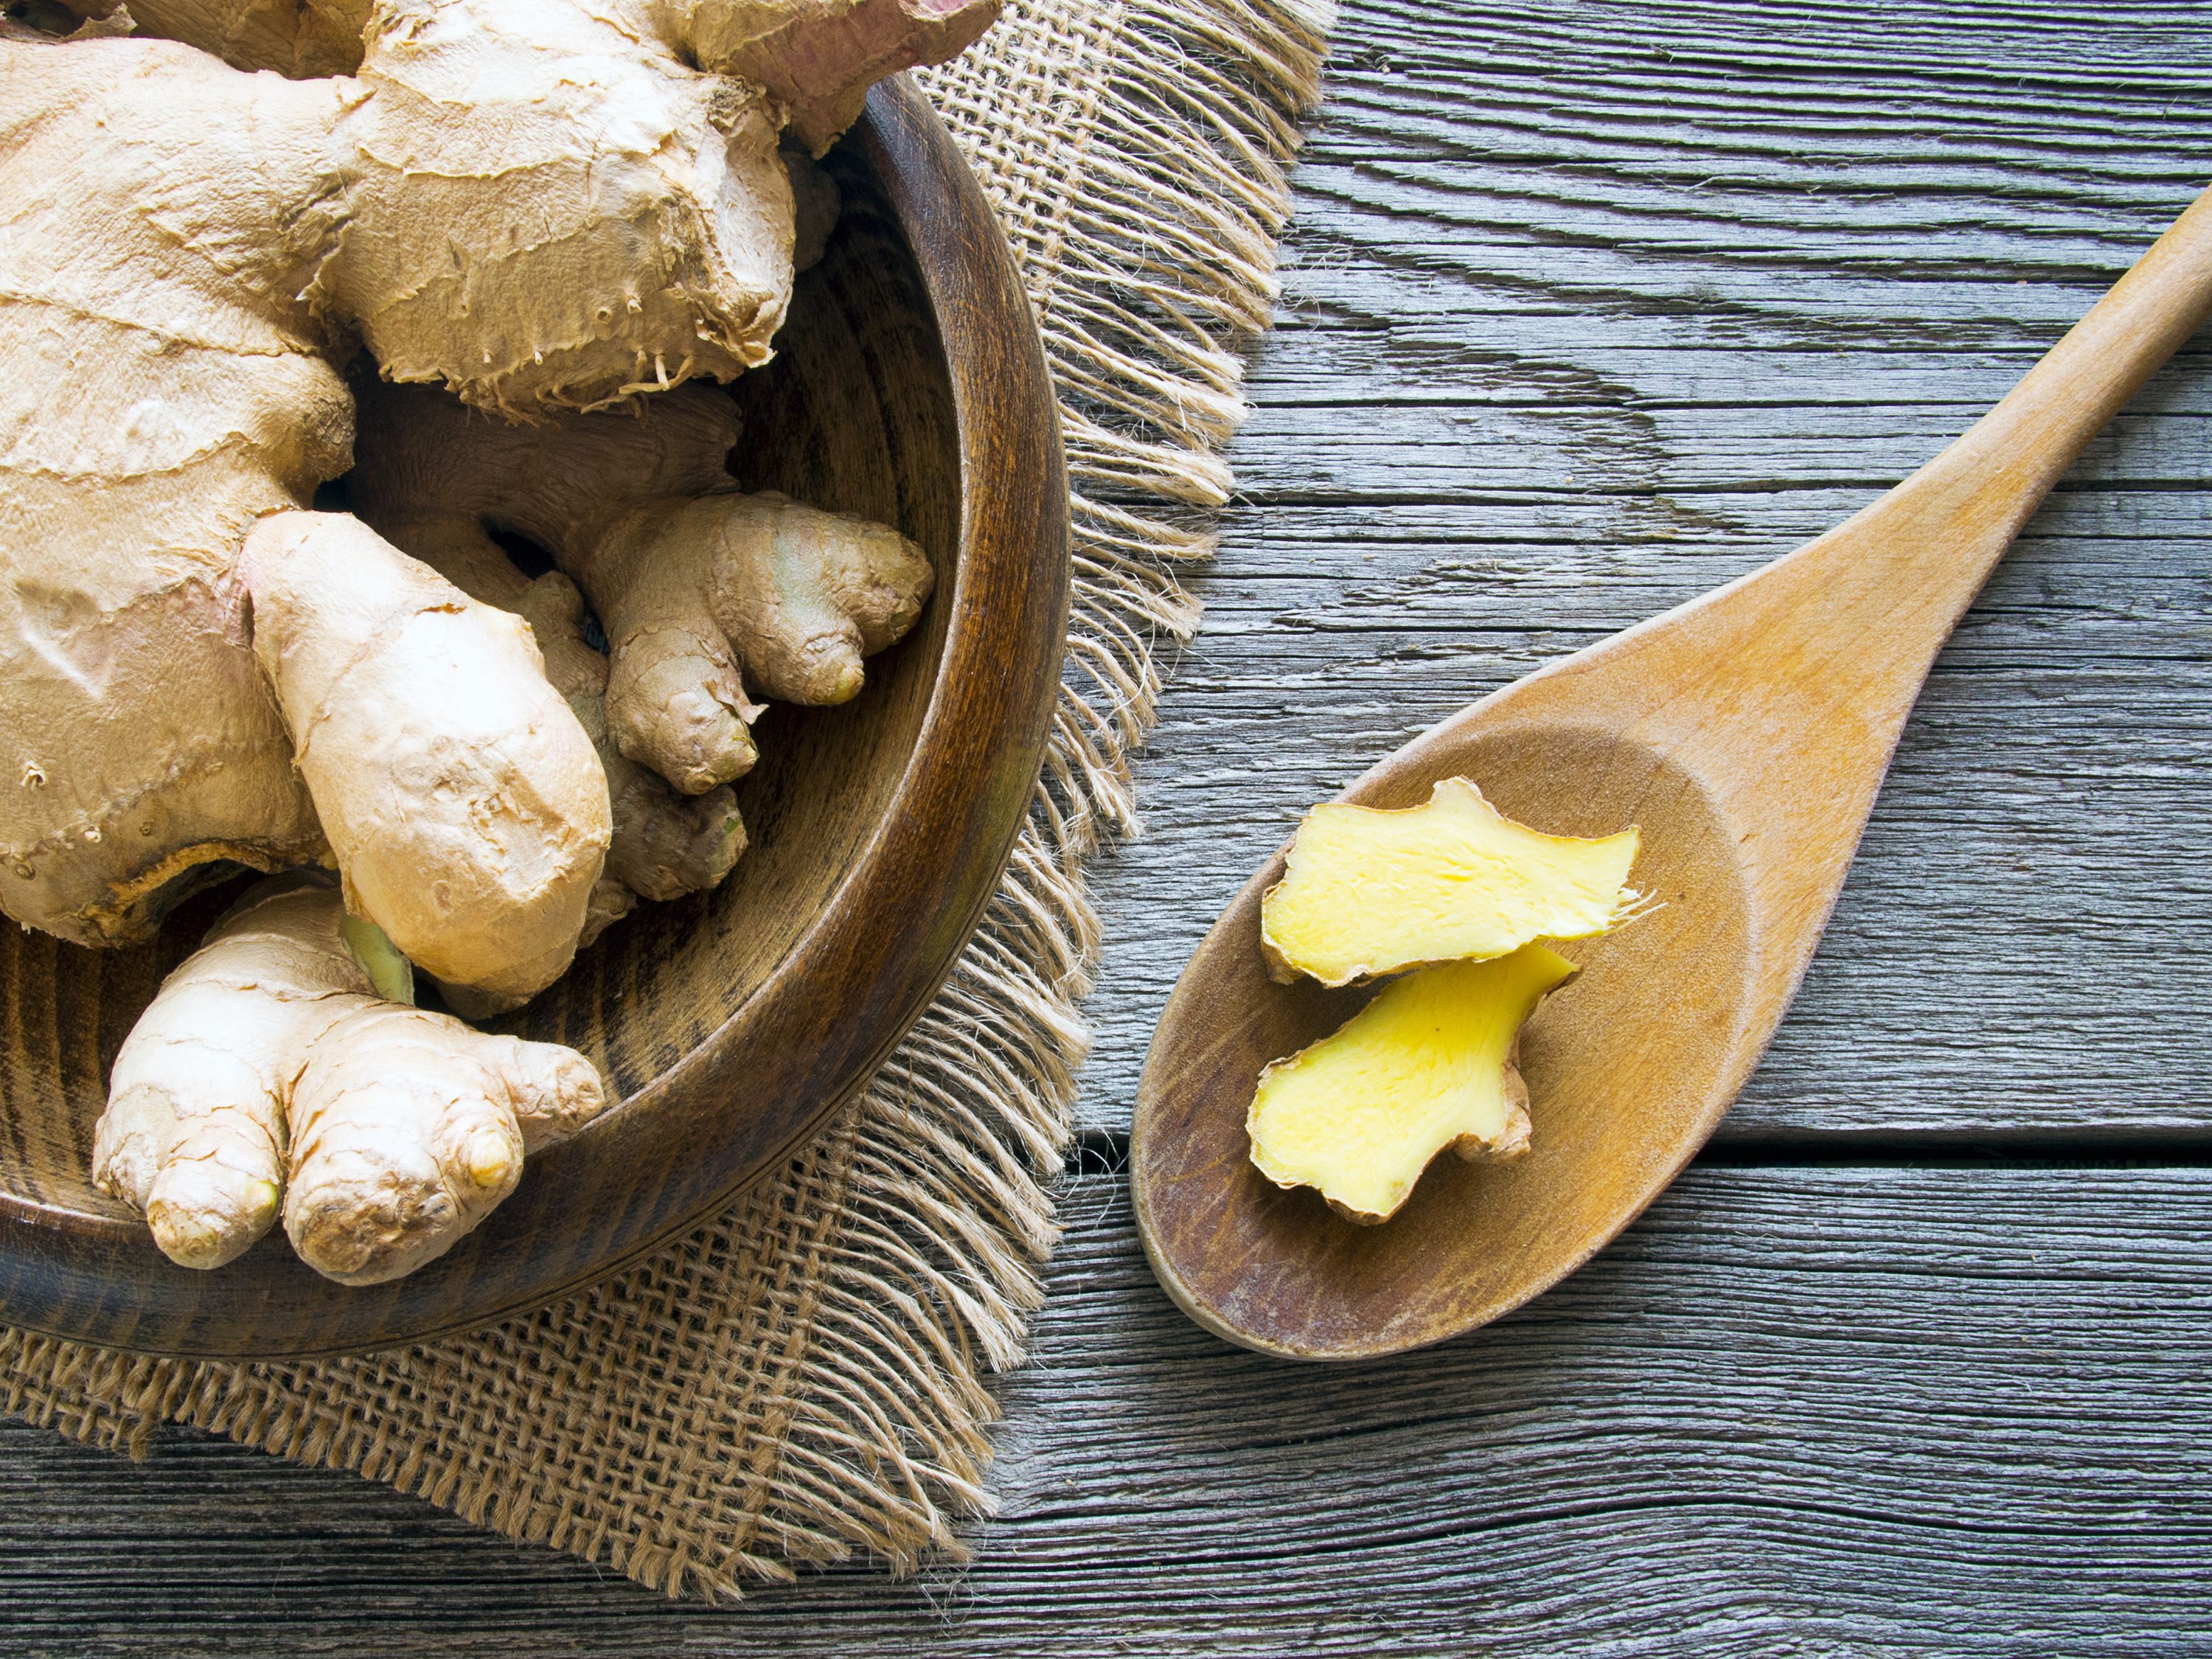 What to Know About the Health Benefits of Ginger—And How to Add It